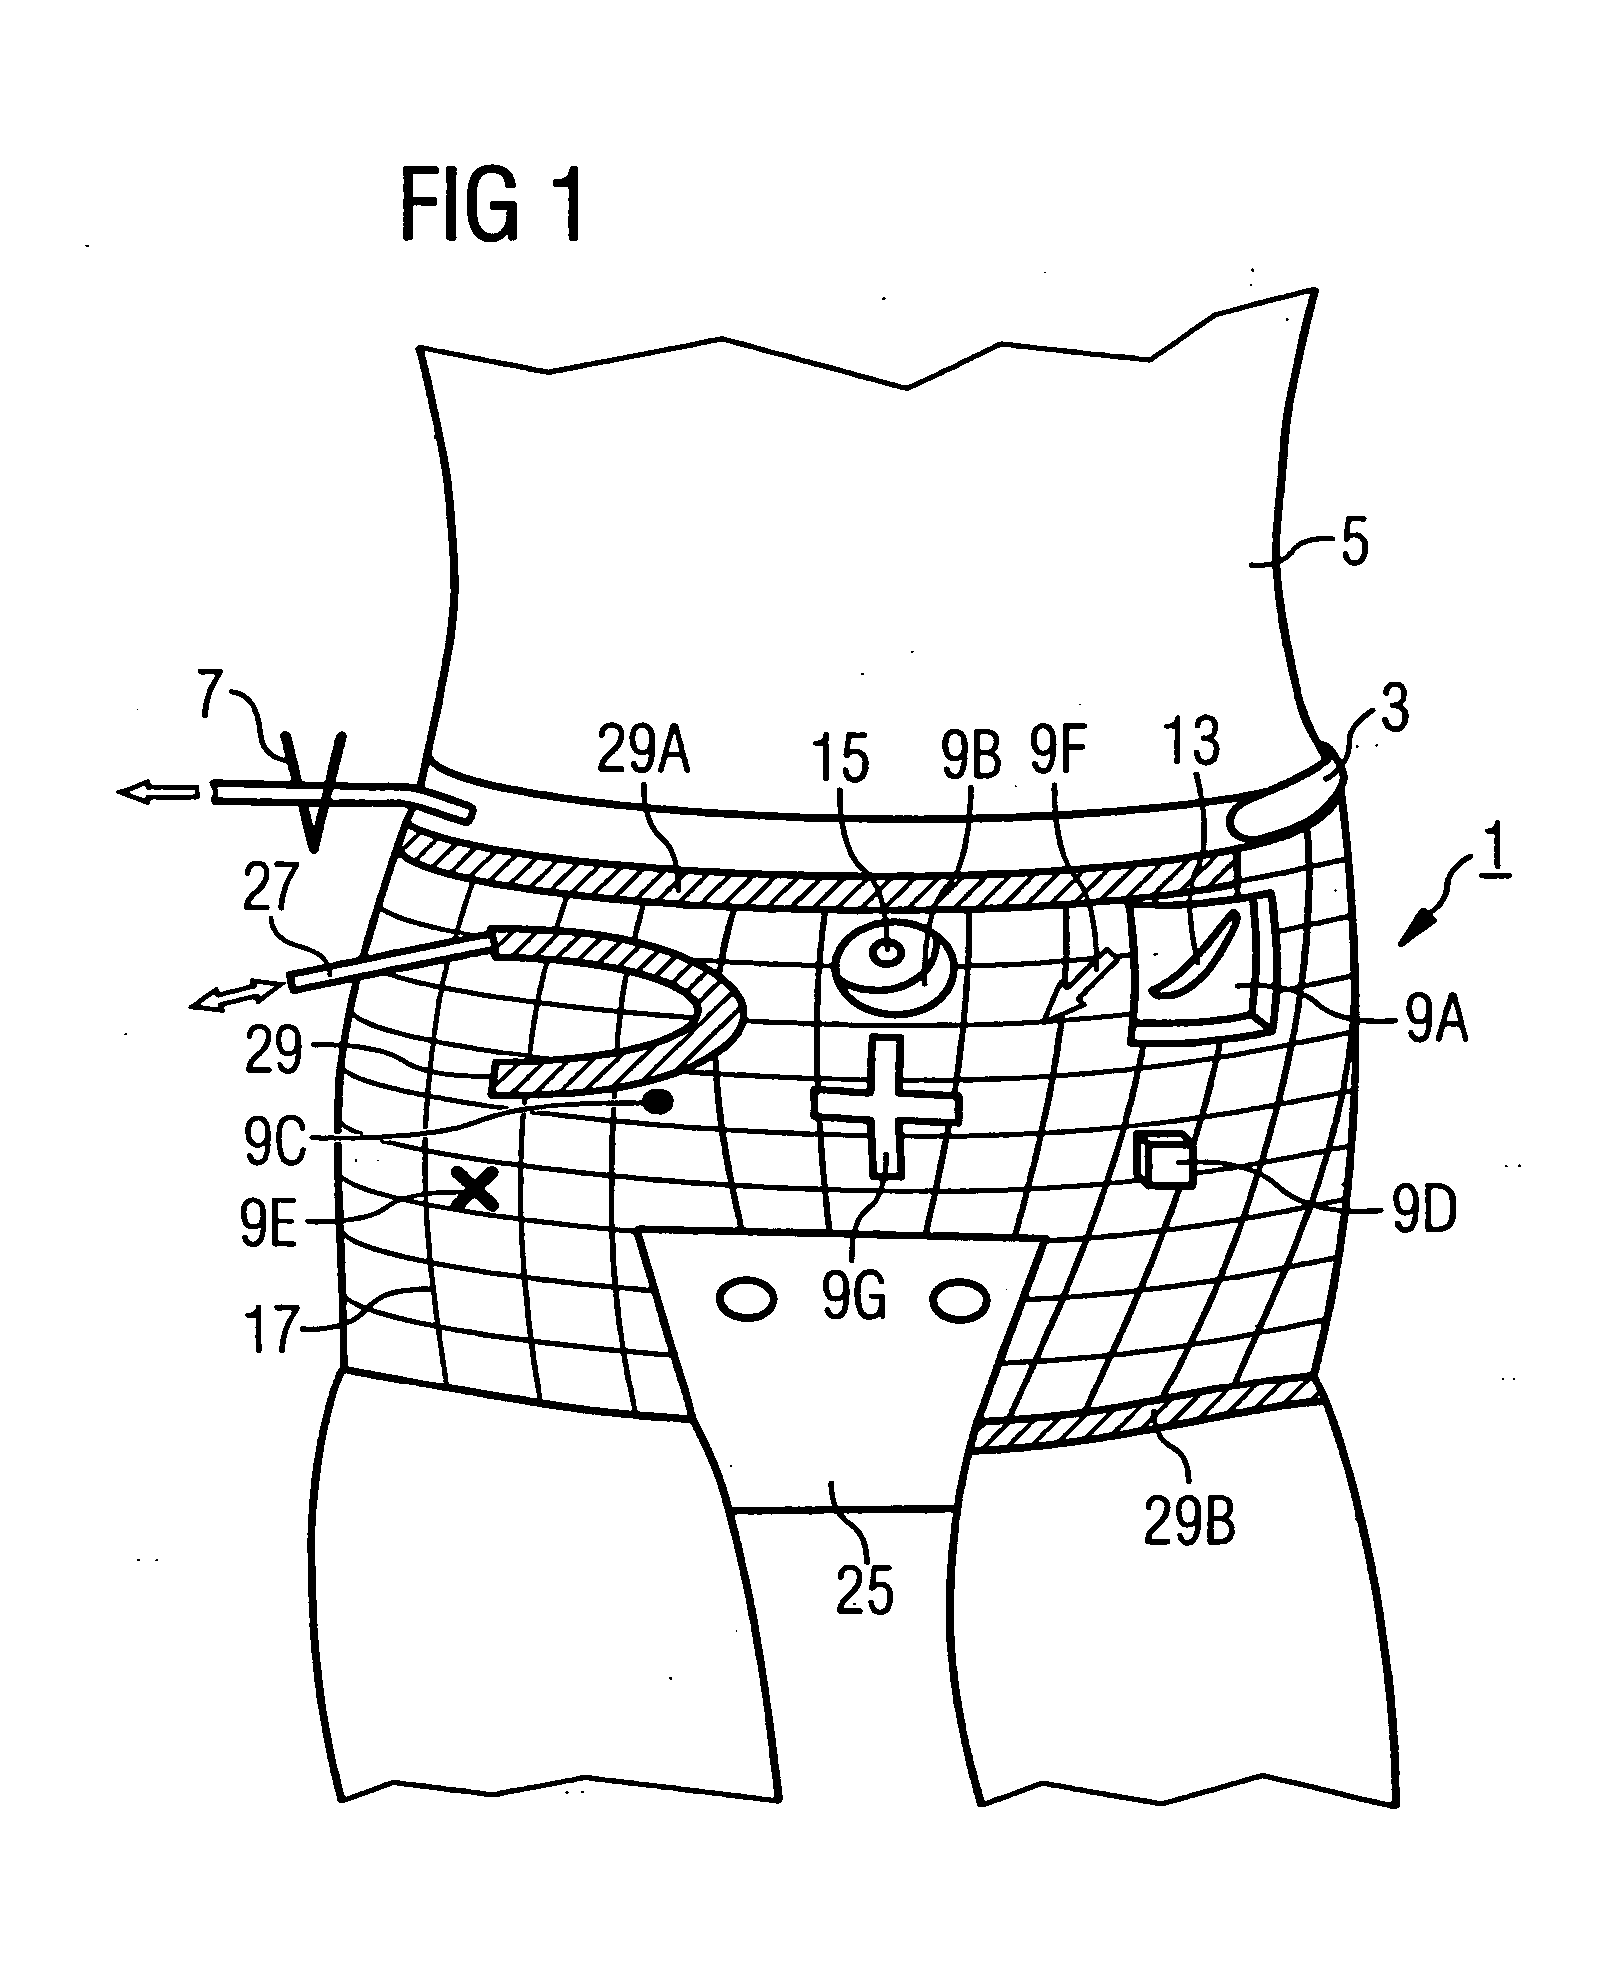 Positioning device for positioning a patient